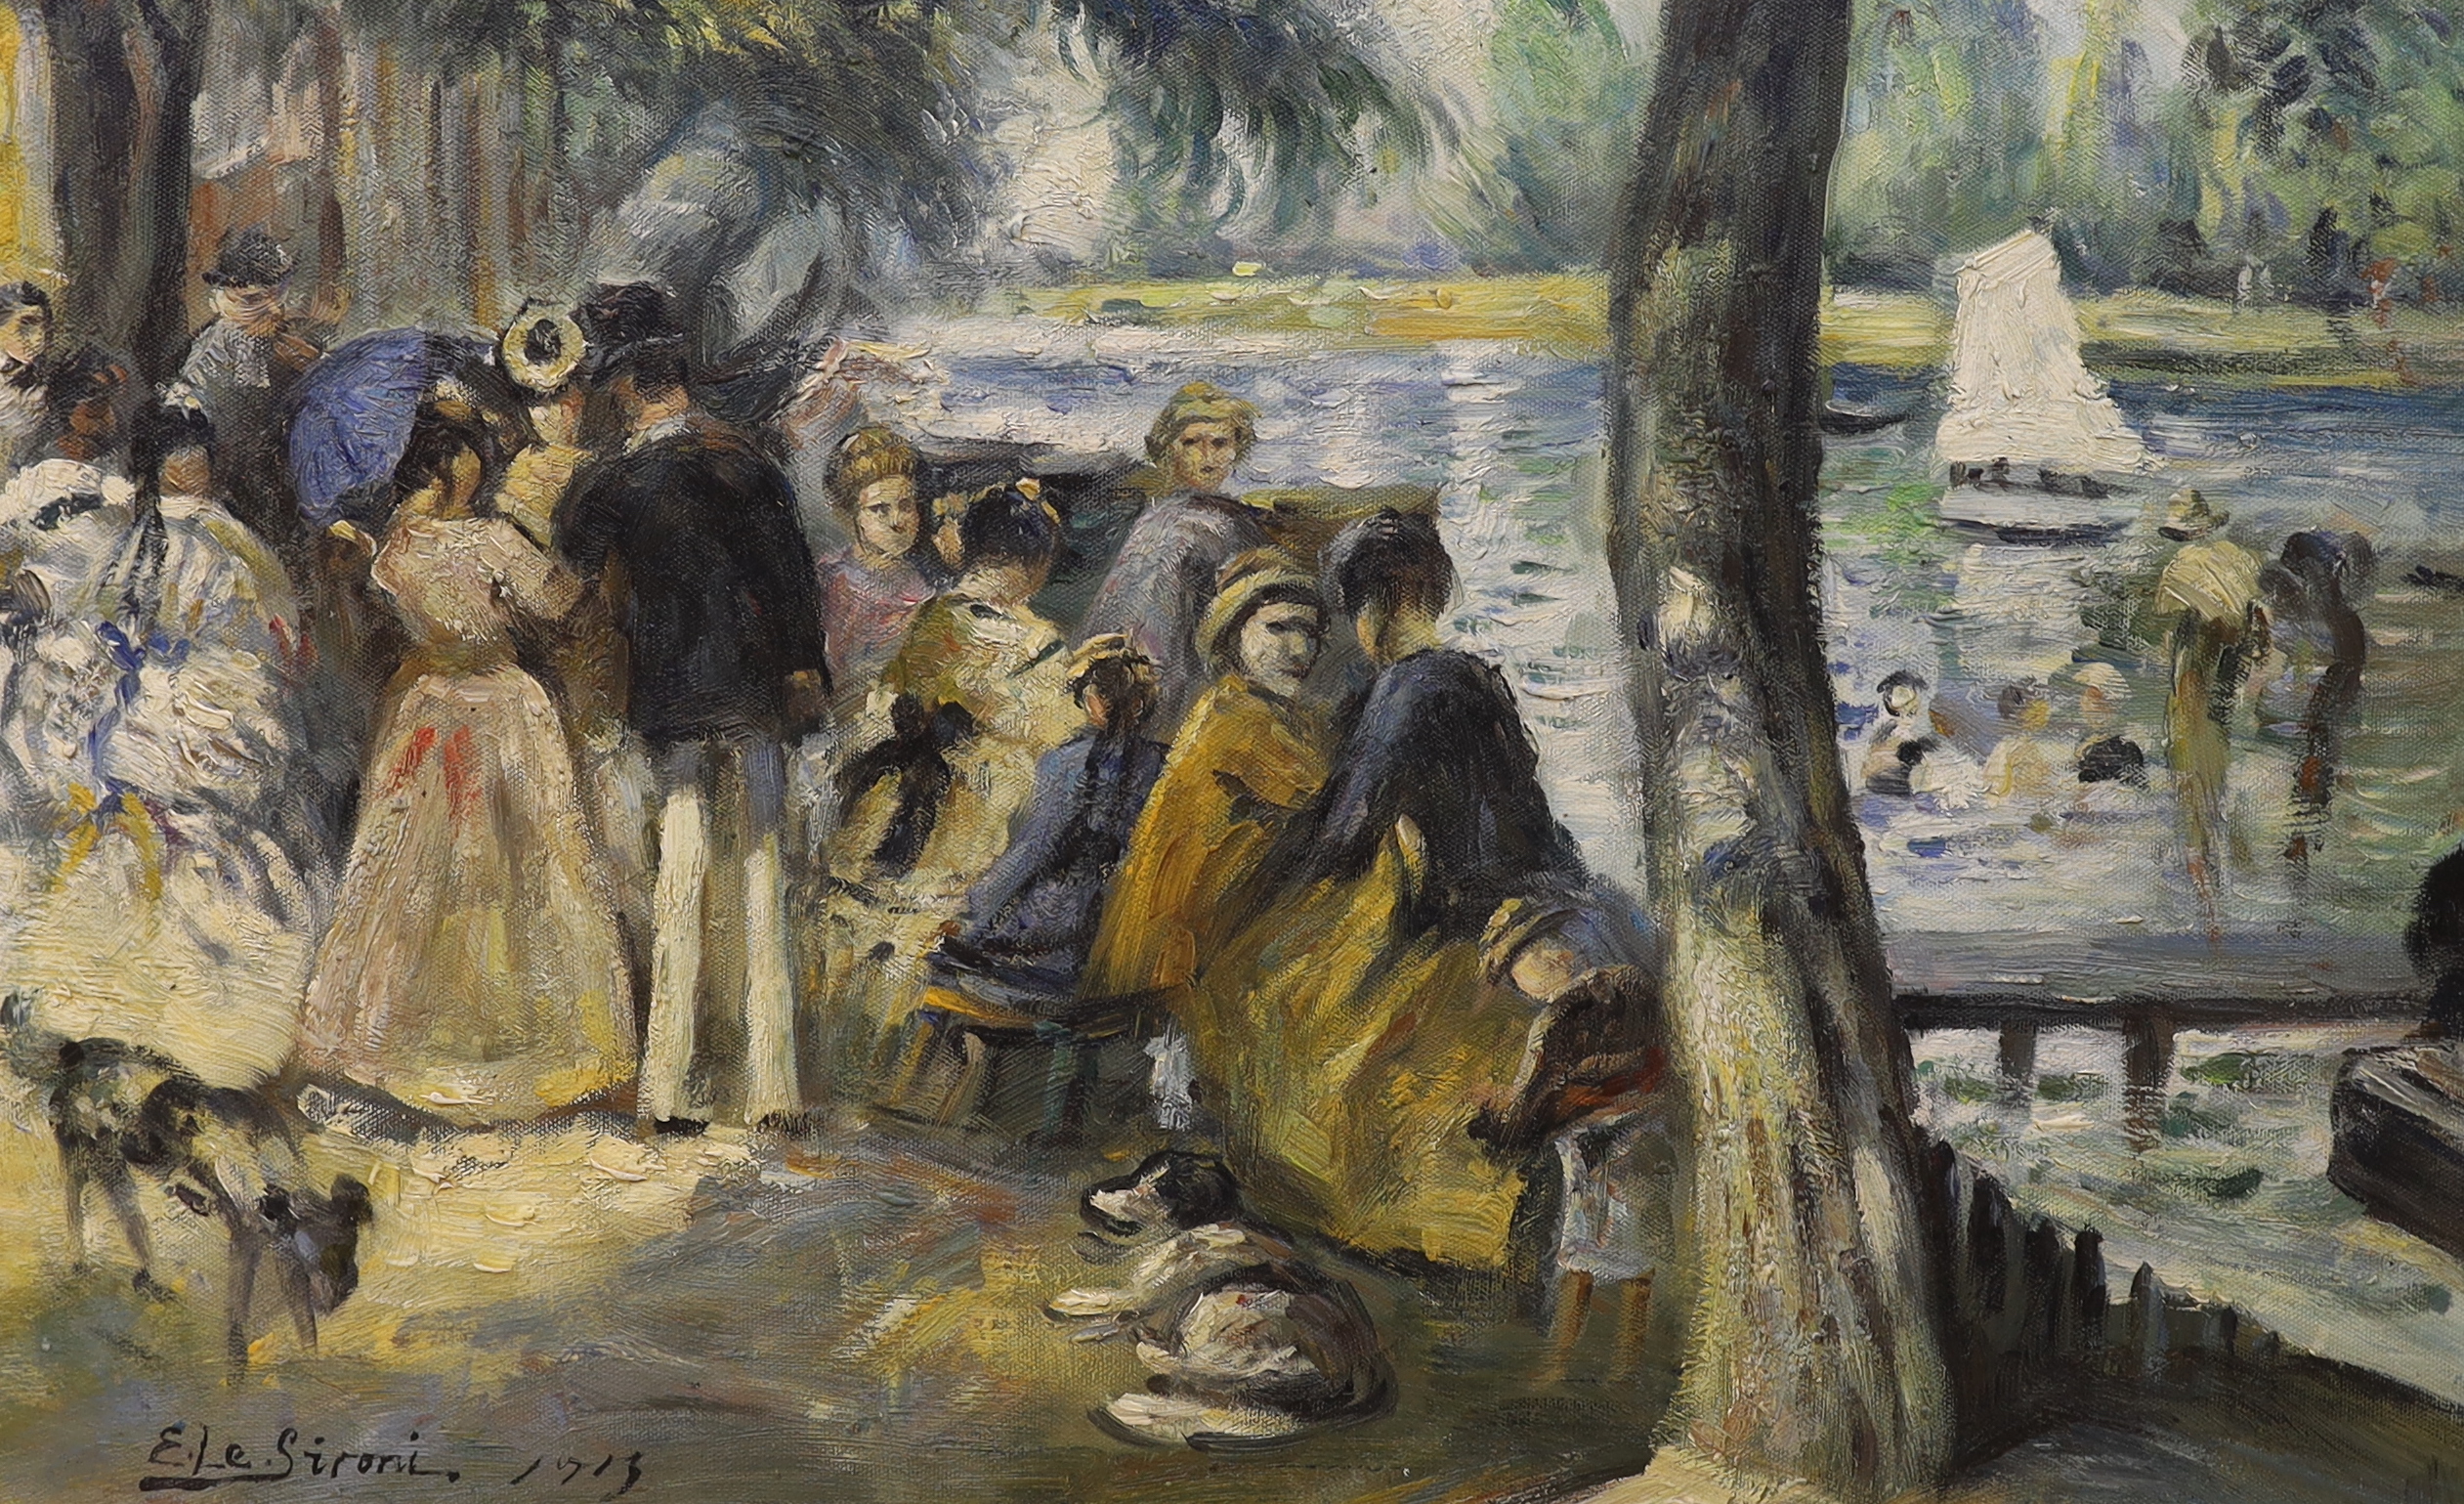 E. Le Saroni, oil on board, Figures at a boating park, bears signature and date 1913, 34 x 56cm